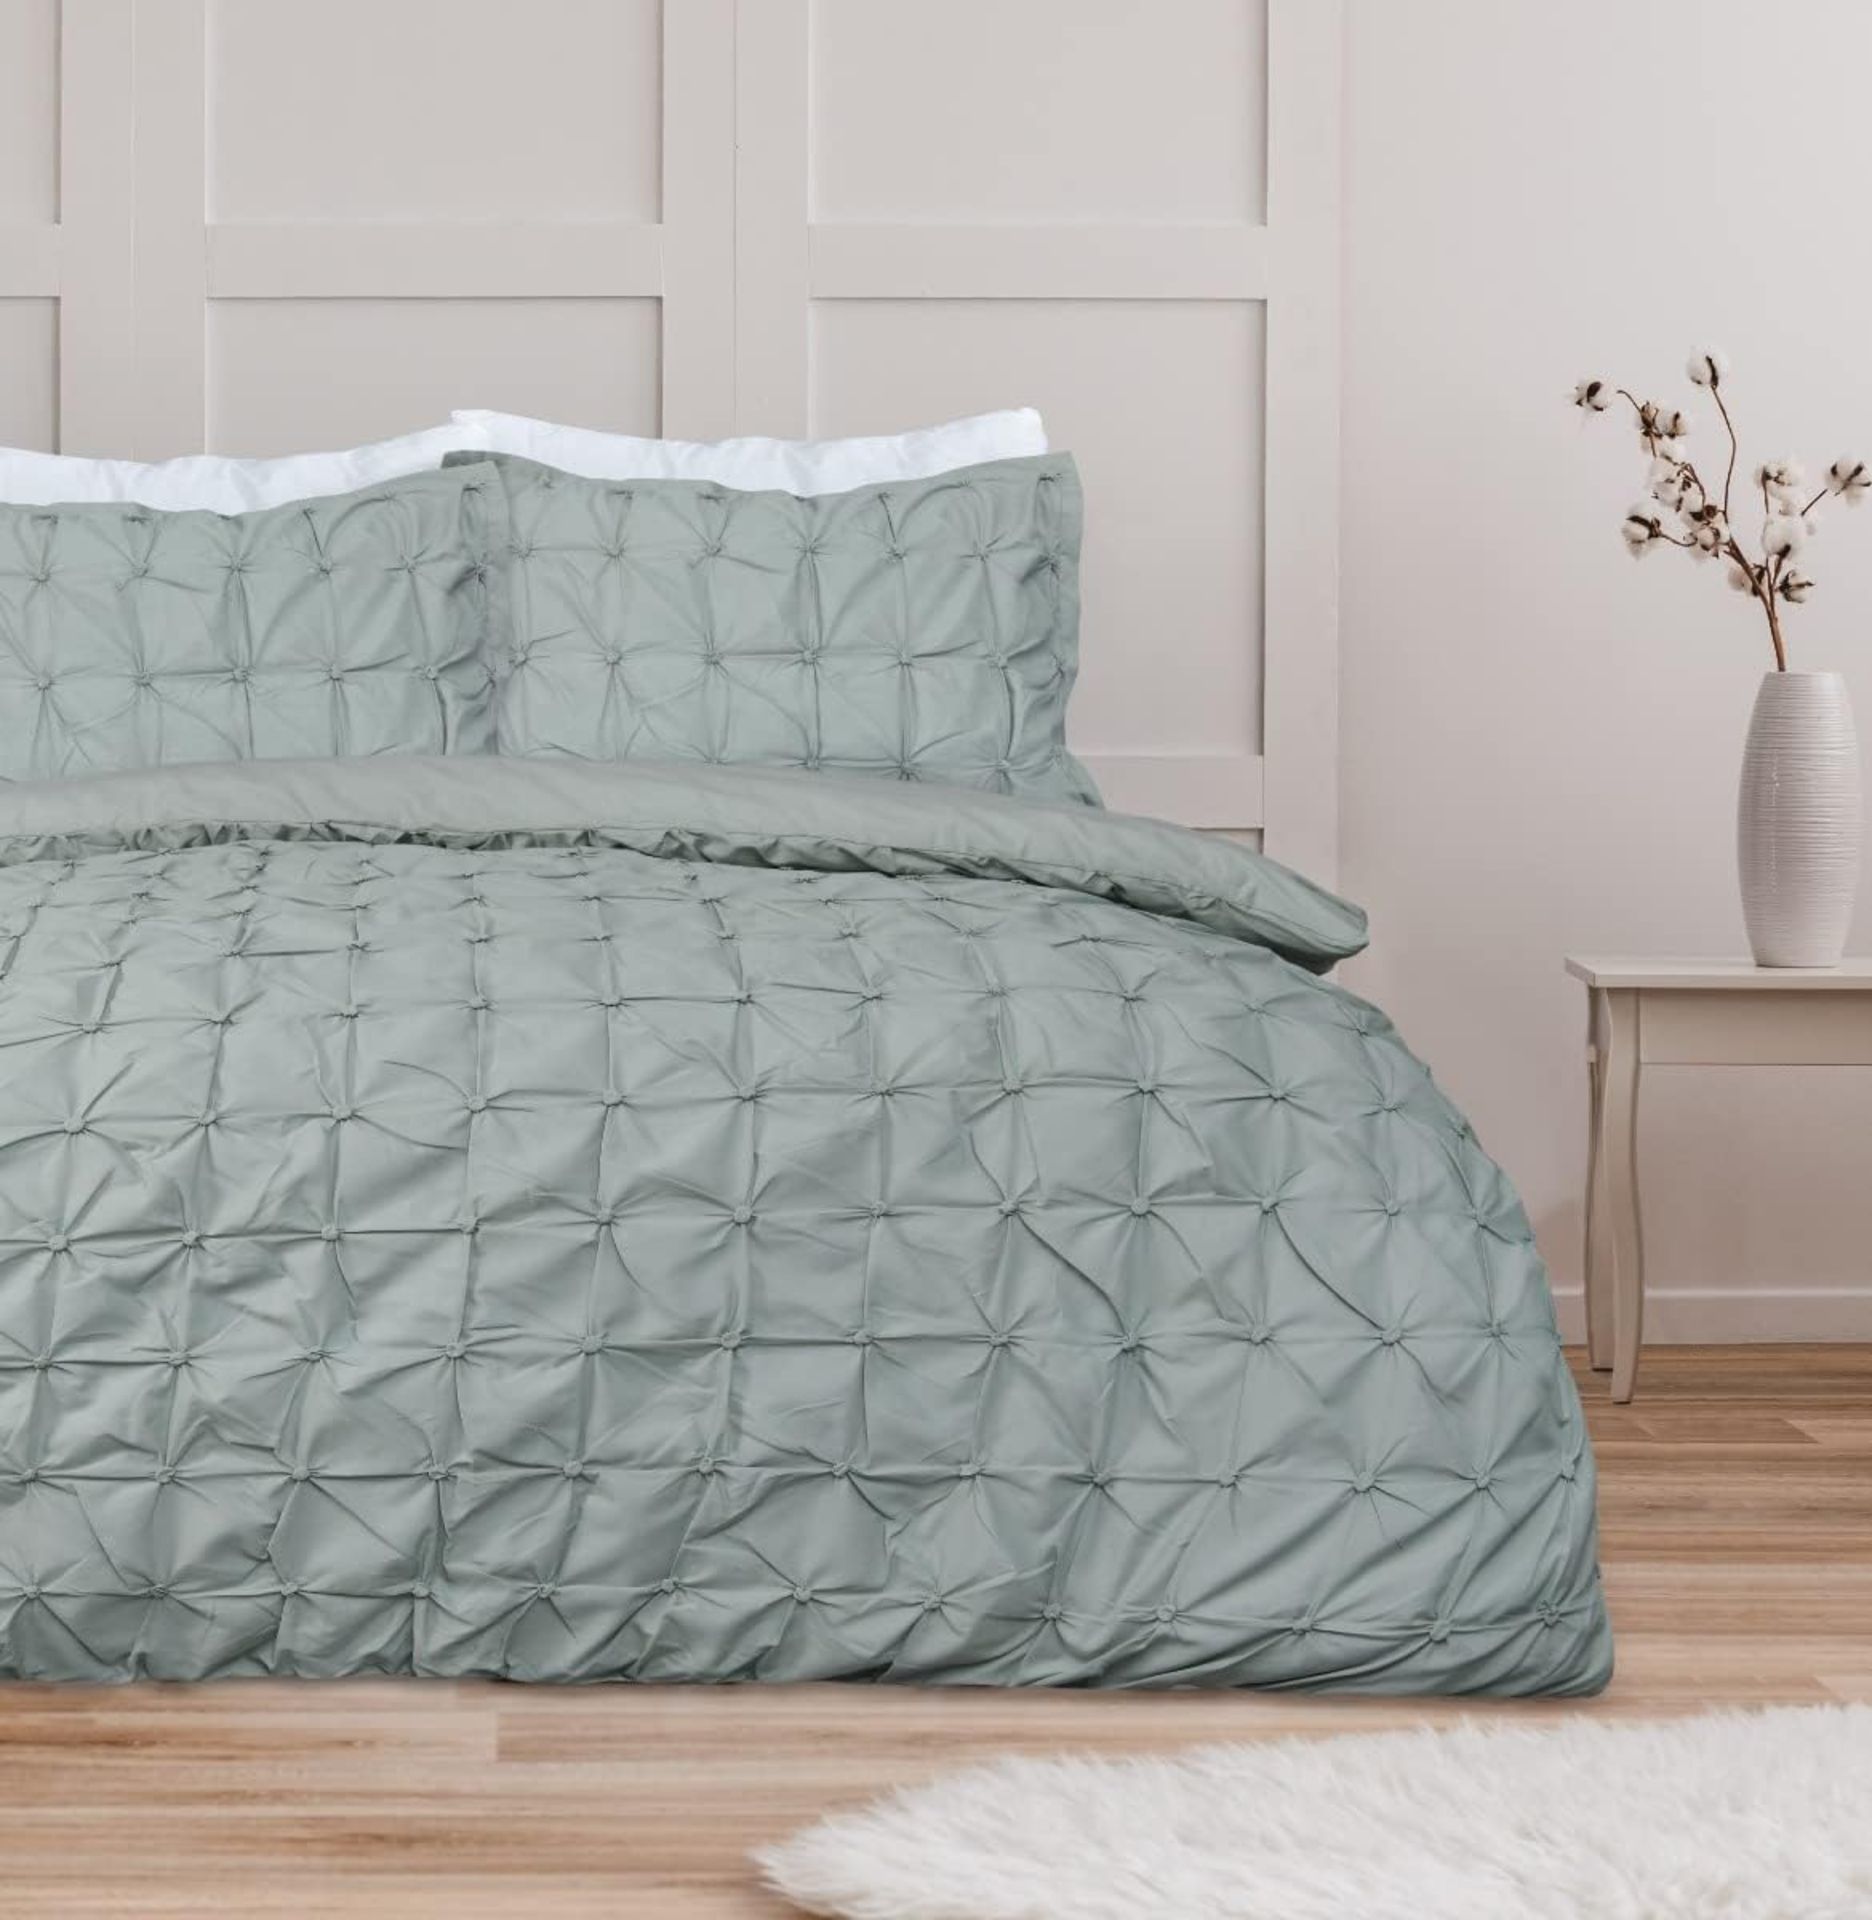 11x NEW & PACKAGED SLEEPDOWN Rouched Easy Care SINGLE Duvet Set - SAGE GREEN. RRP £22.99 EACH. (R7-